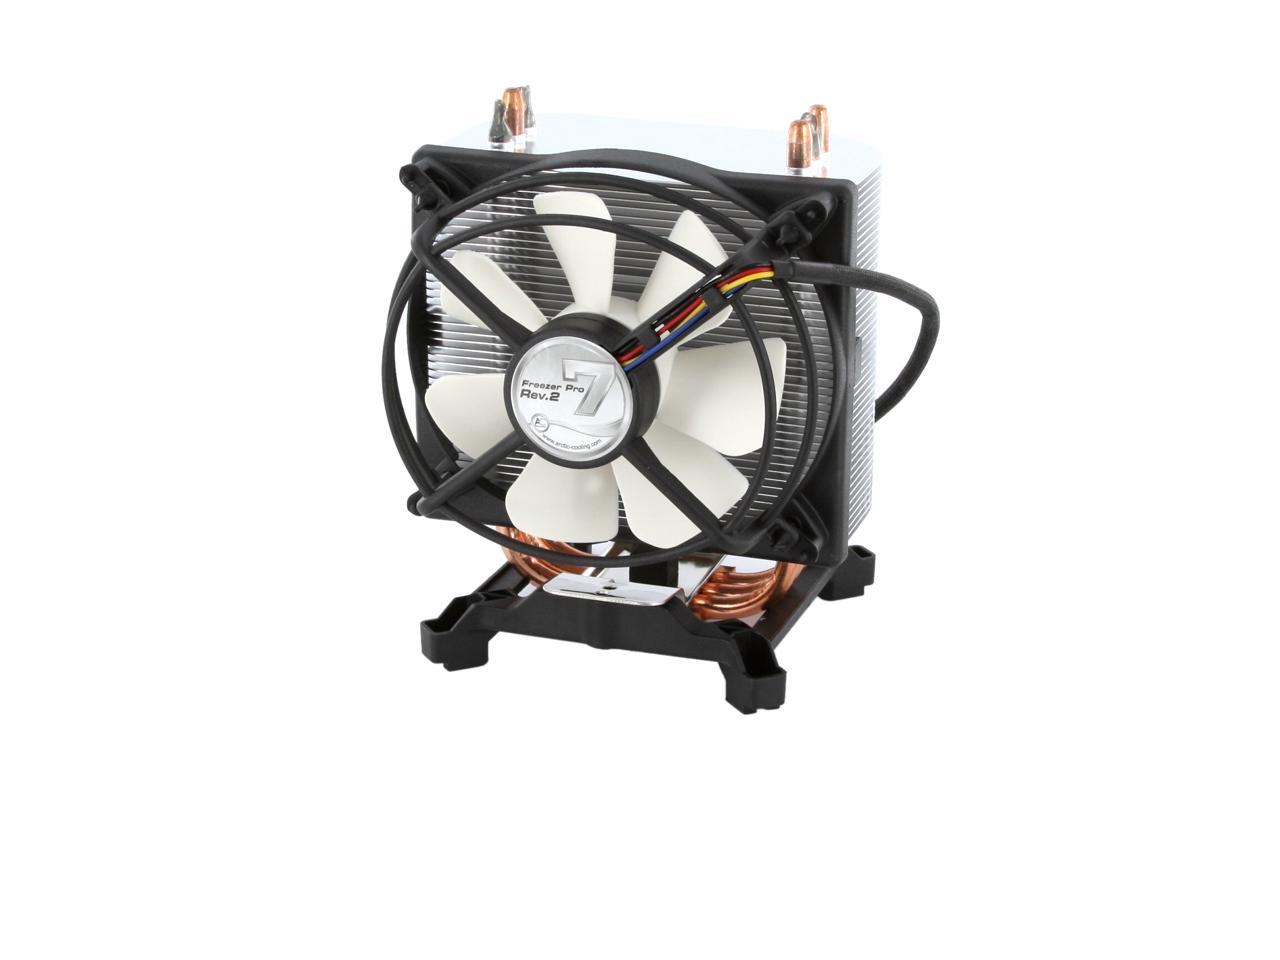 Ahead Sunburn Pew Open Box: ARCTIC Freezer 7 Pro - Compact Multi-Compatible Tower CPU Cooler  | 92 mm PWM Fan | for AMD AM4 and Intel 115x CPU | Recommended up to 115 W  TDP - Newegg.com